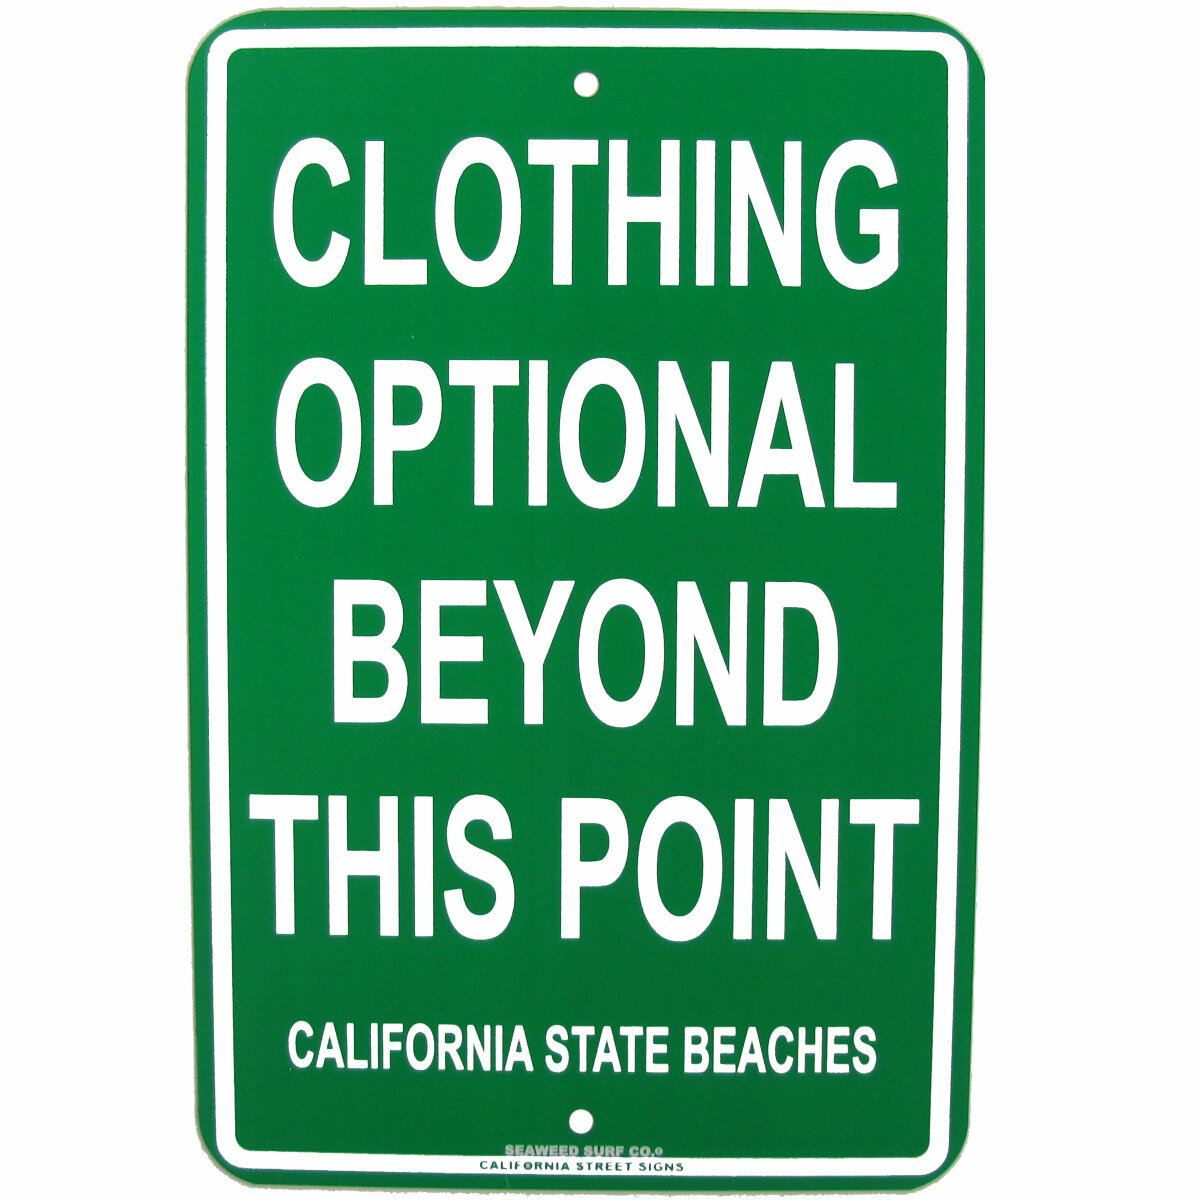 Clothing Optional Beyond This Point 8" x 12" Metal Sign Funny Embossed Plaque